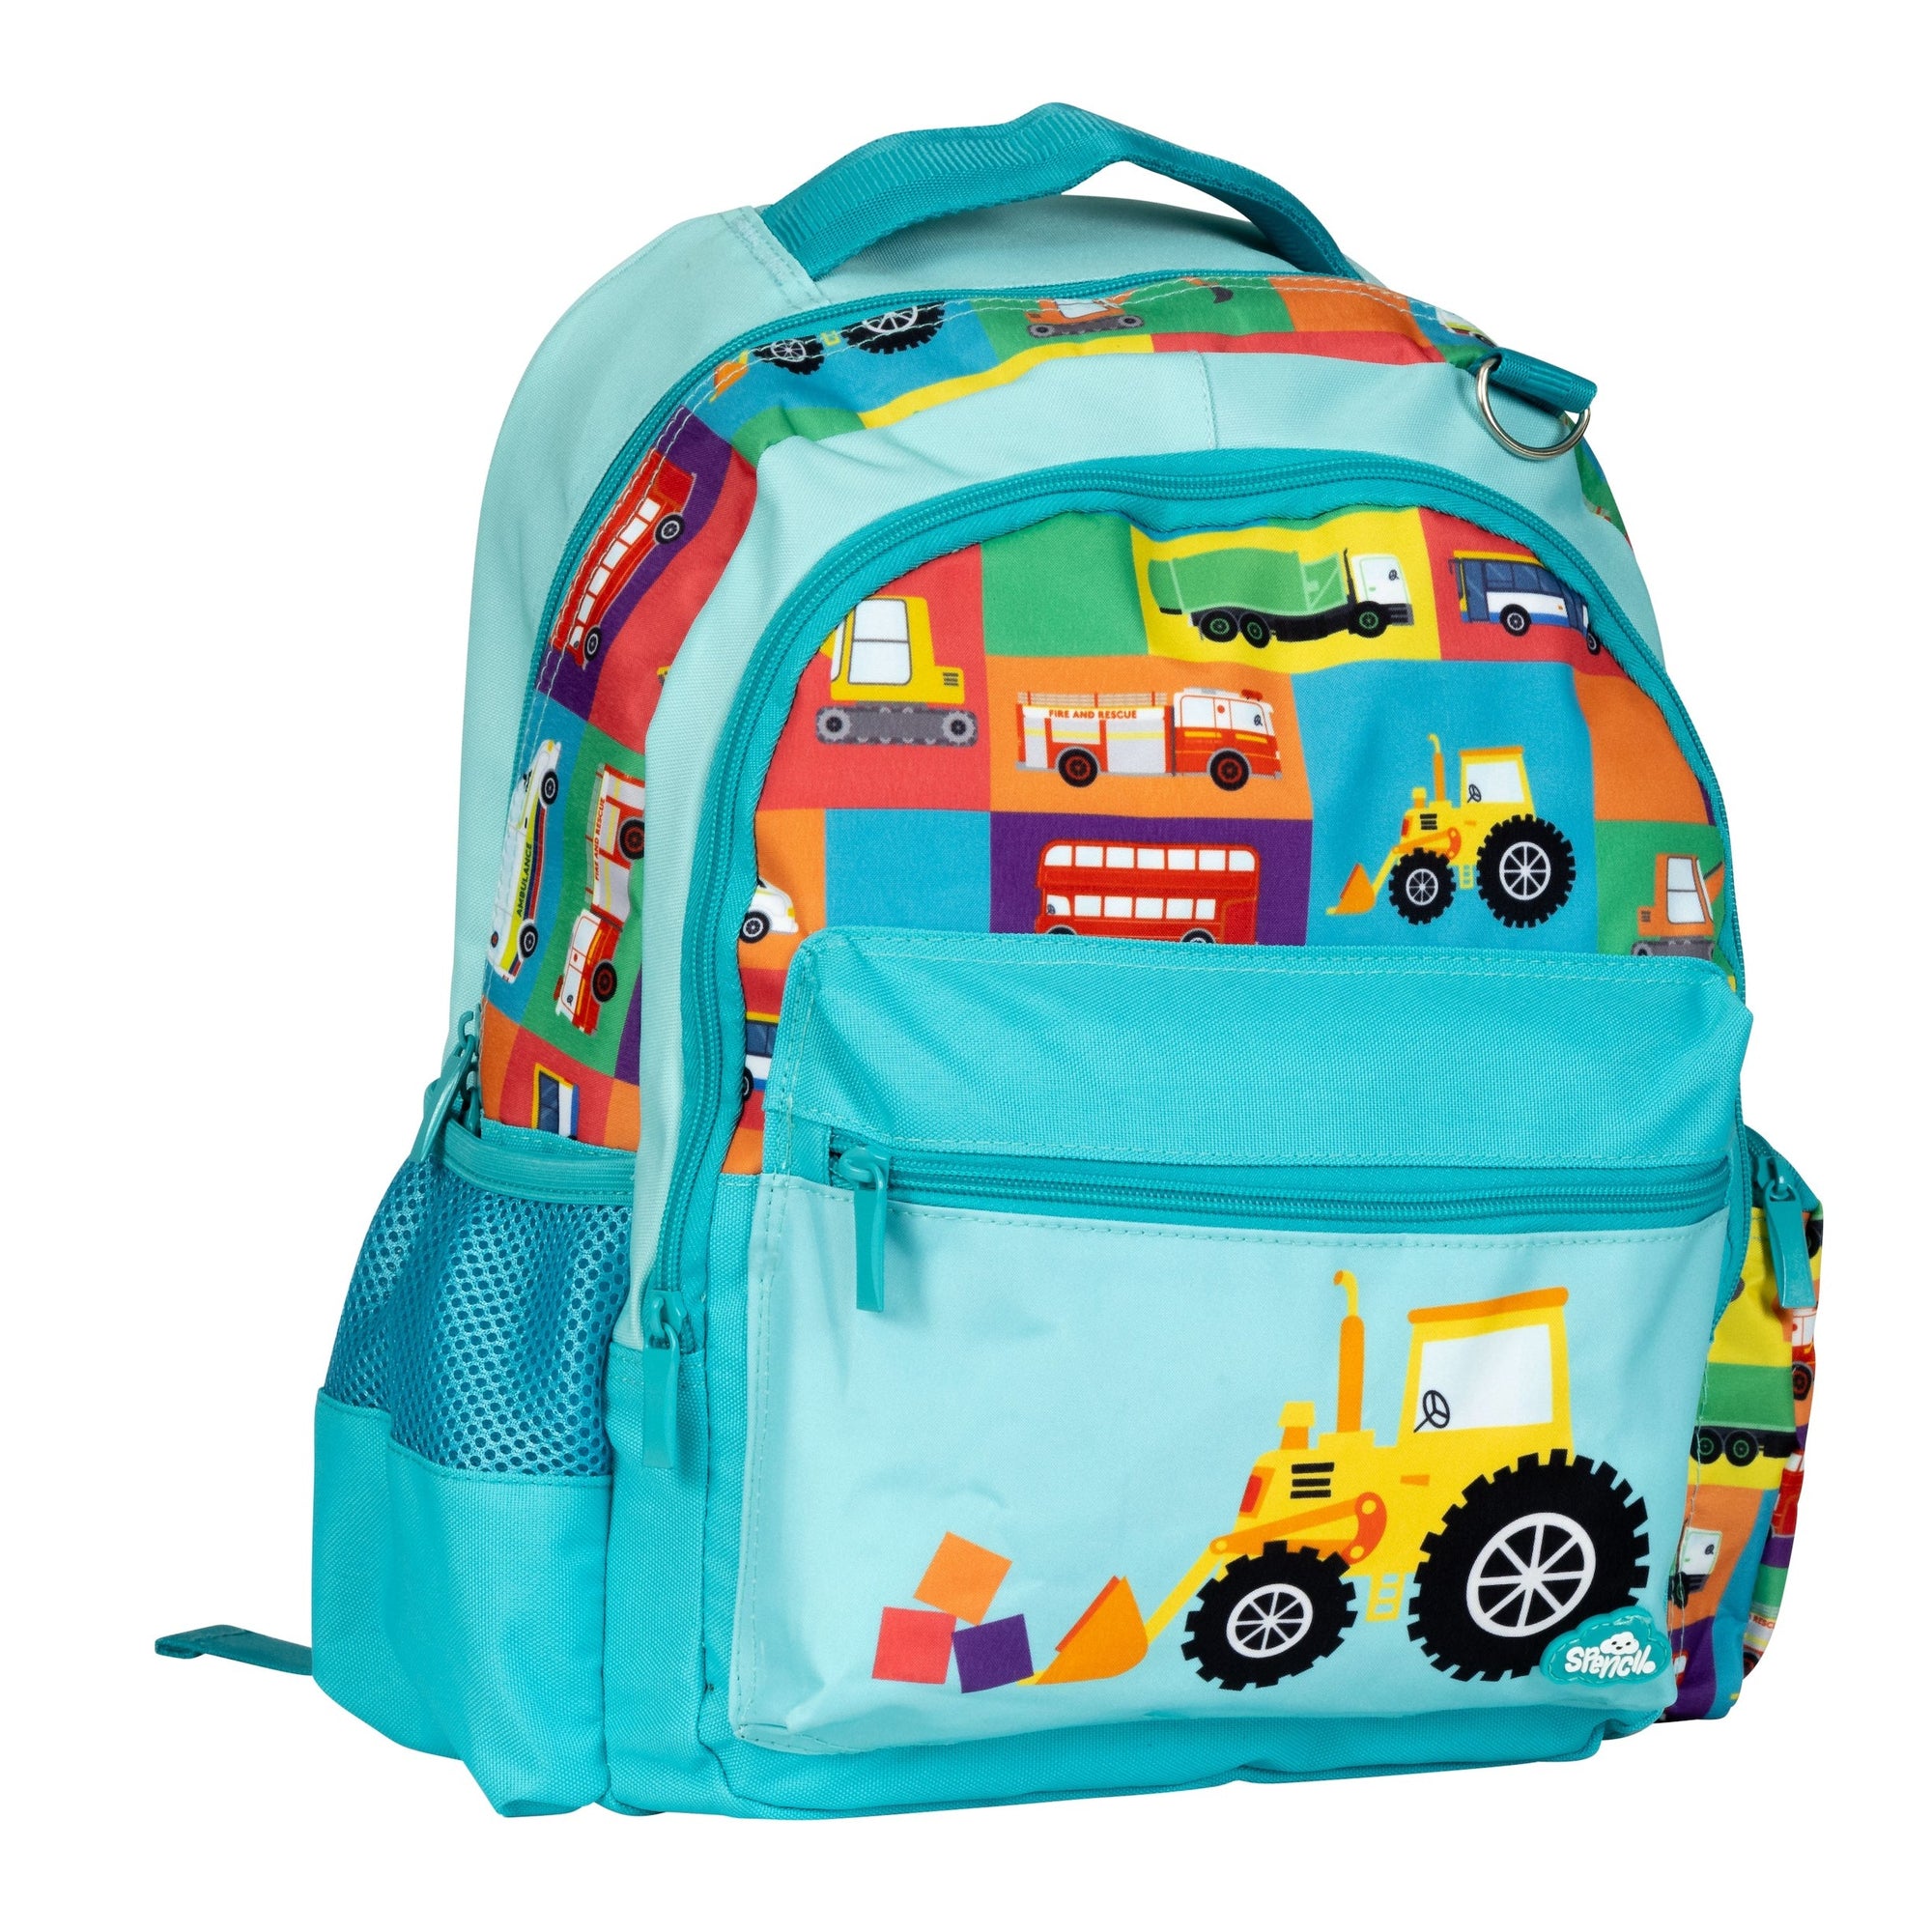 Kids backpack - angus and dudley